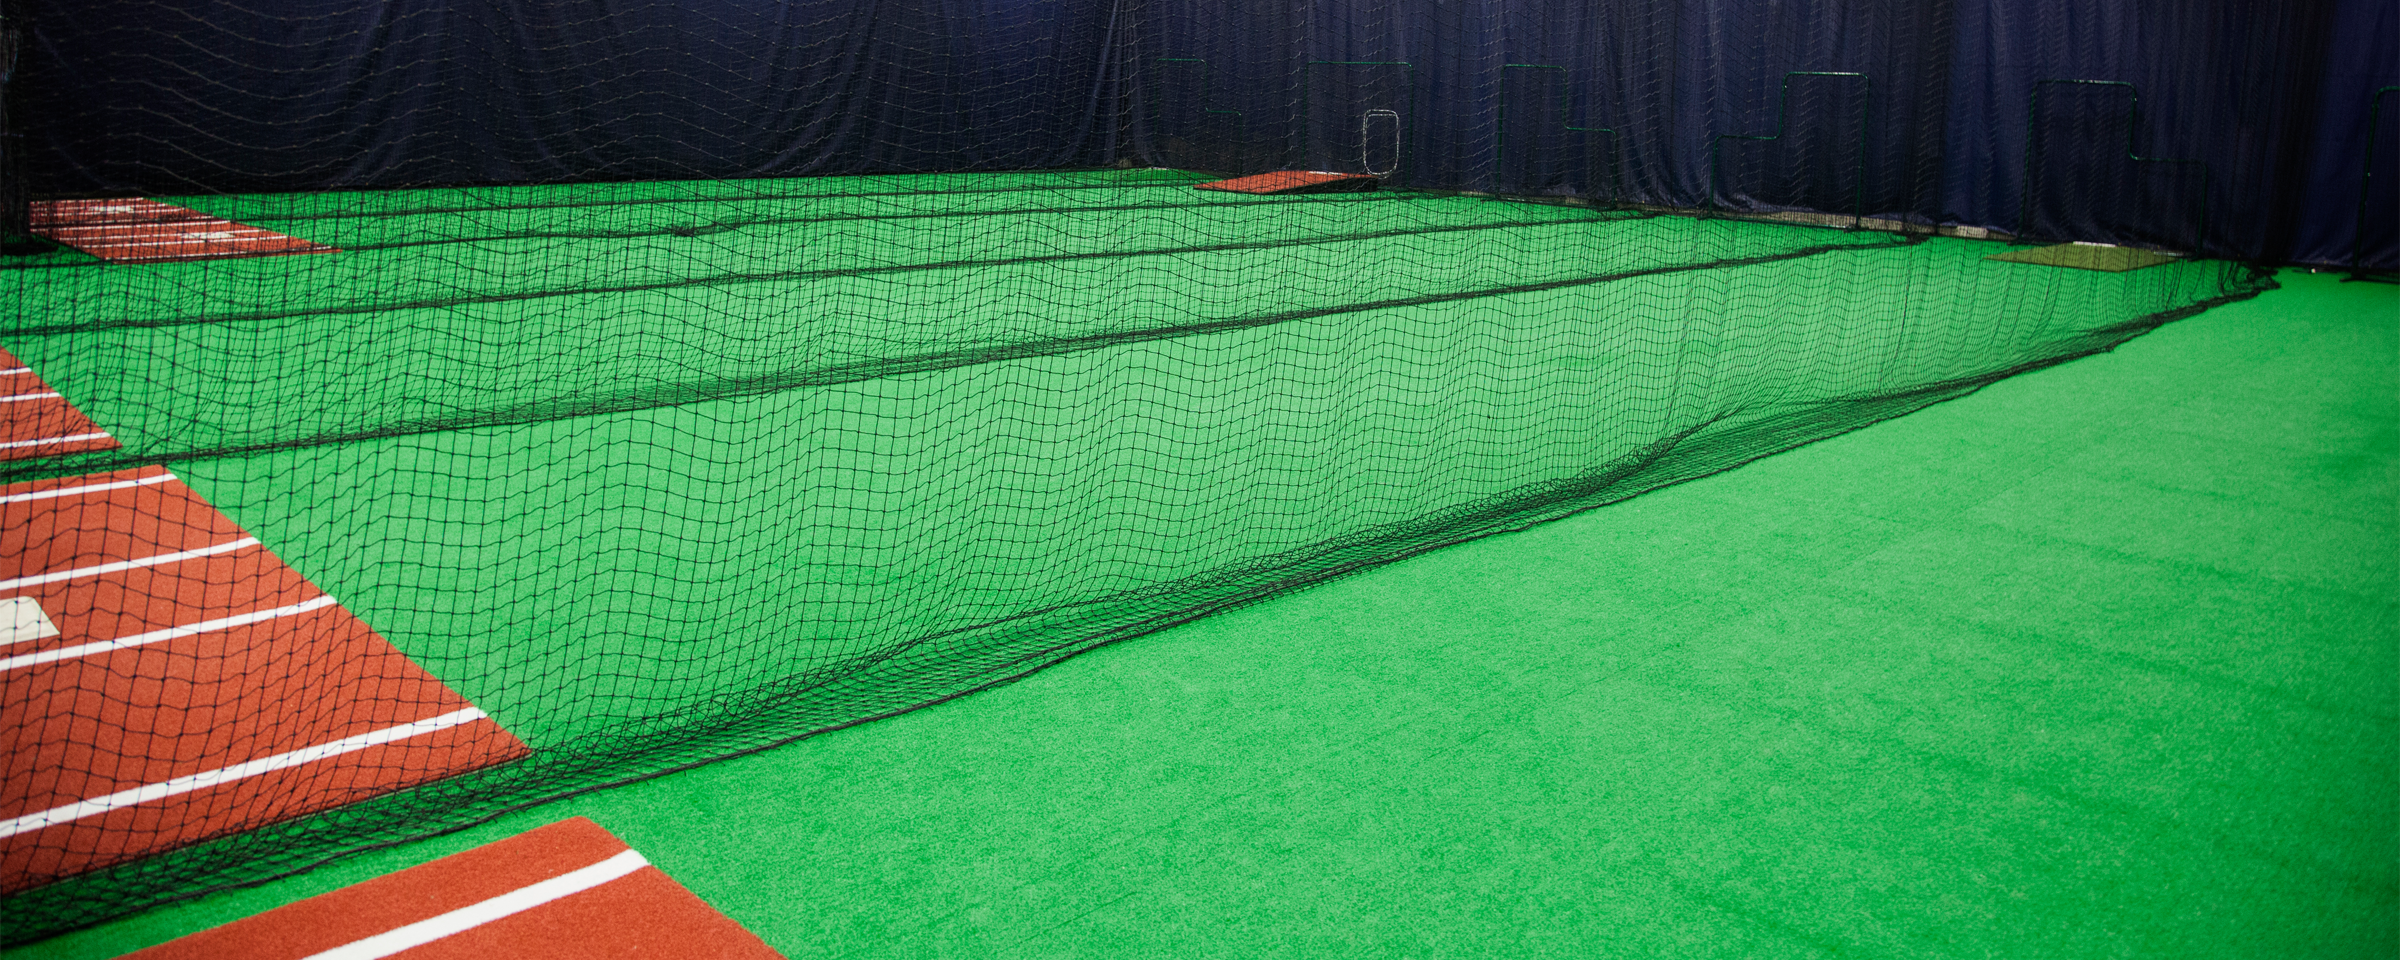 How To Clean Artificial Turf In Gyms and Indoor Sports Facilities | On Deck  Sports Blog